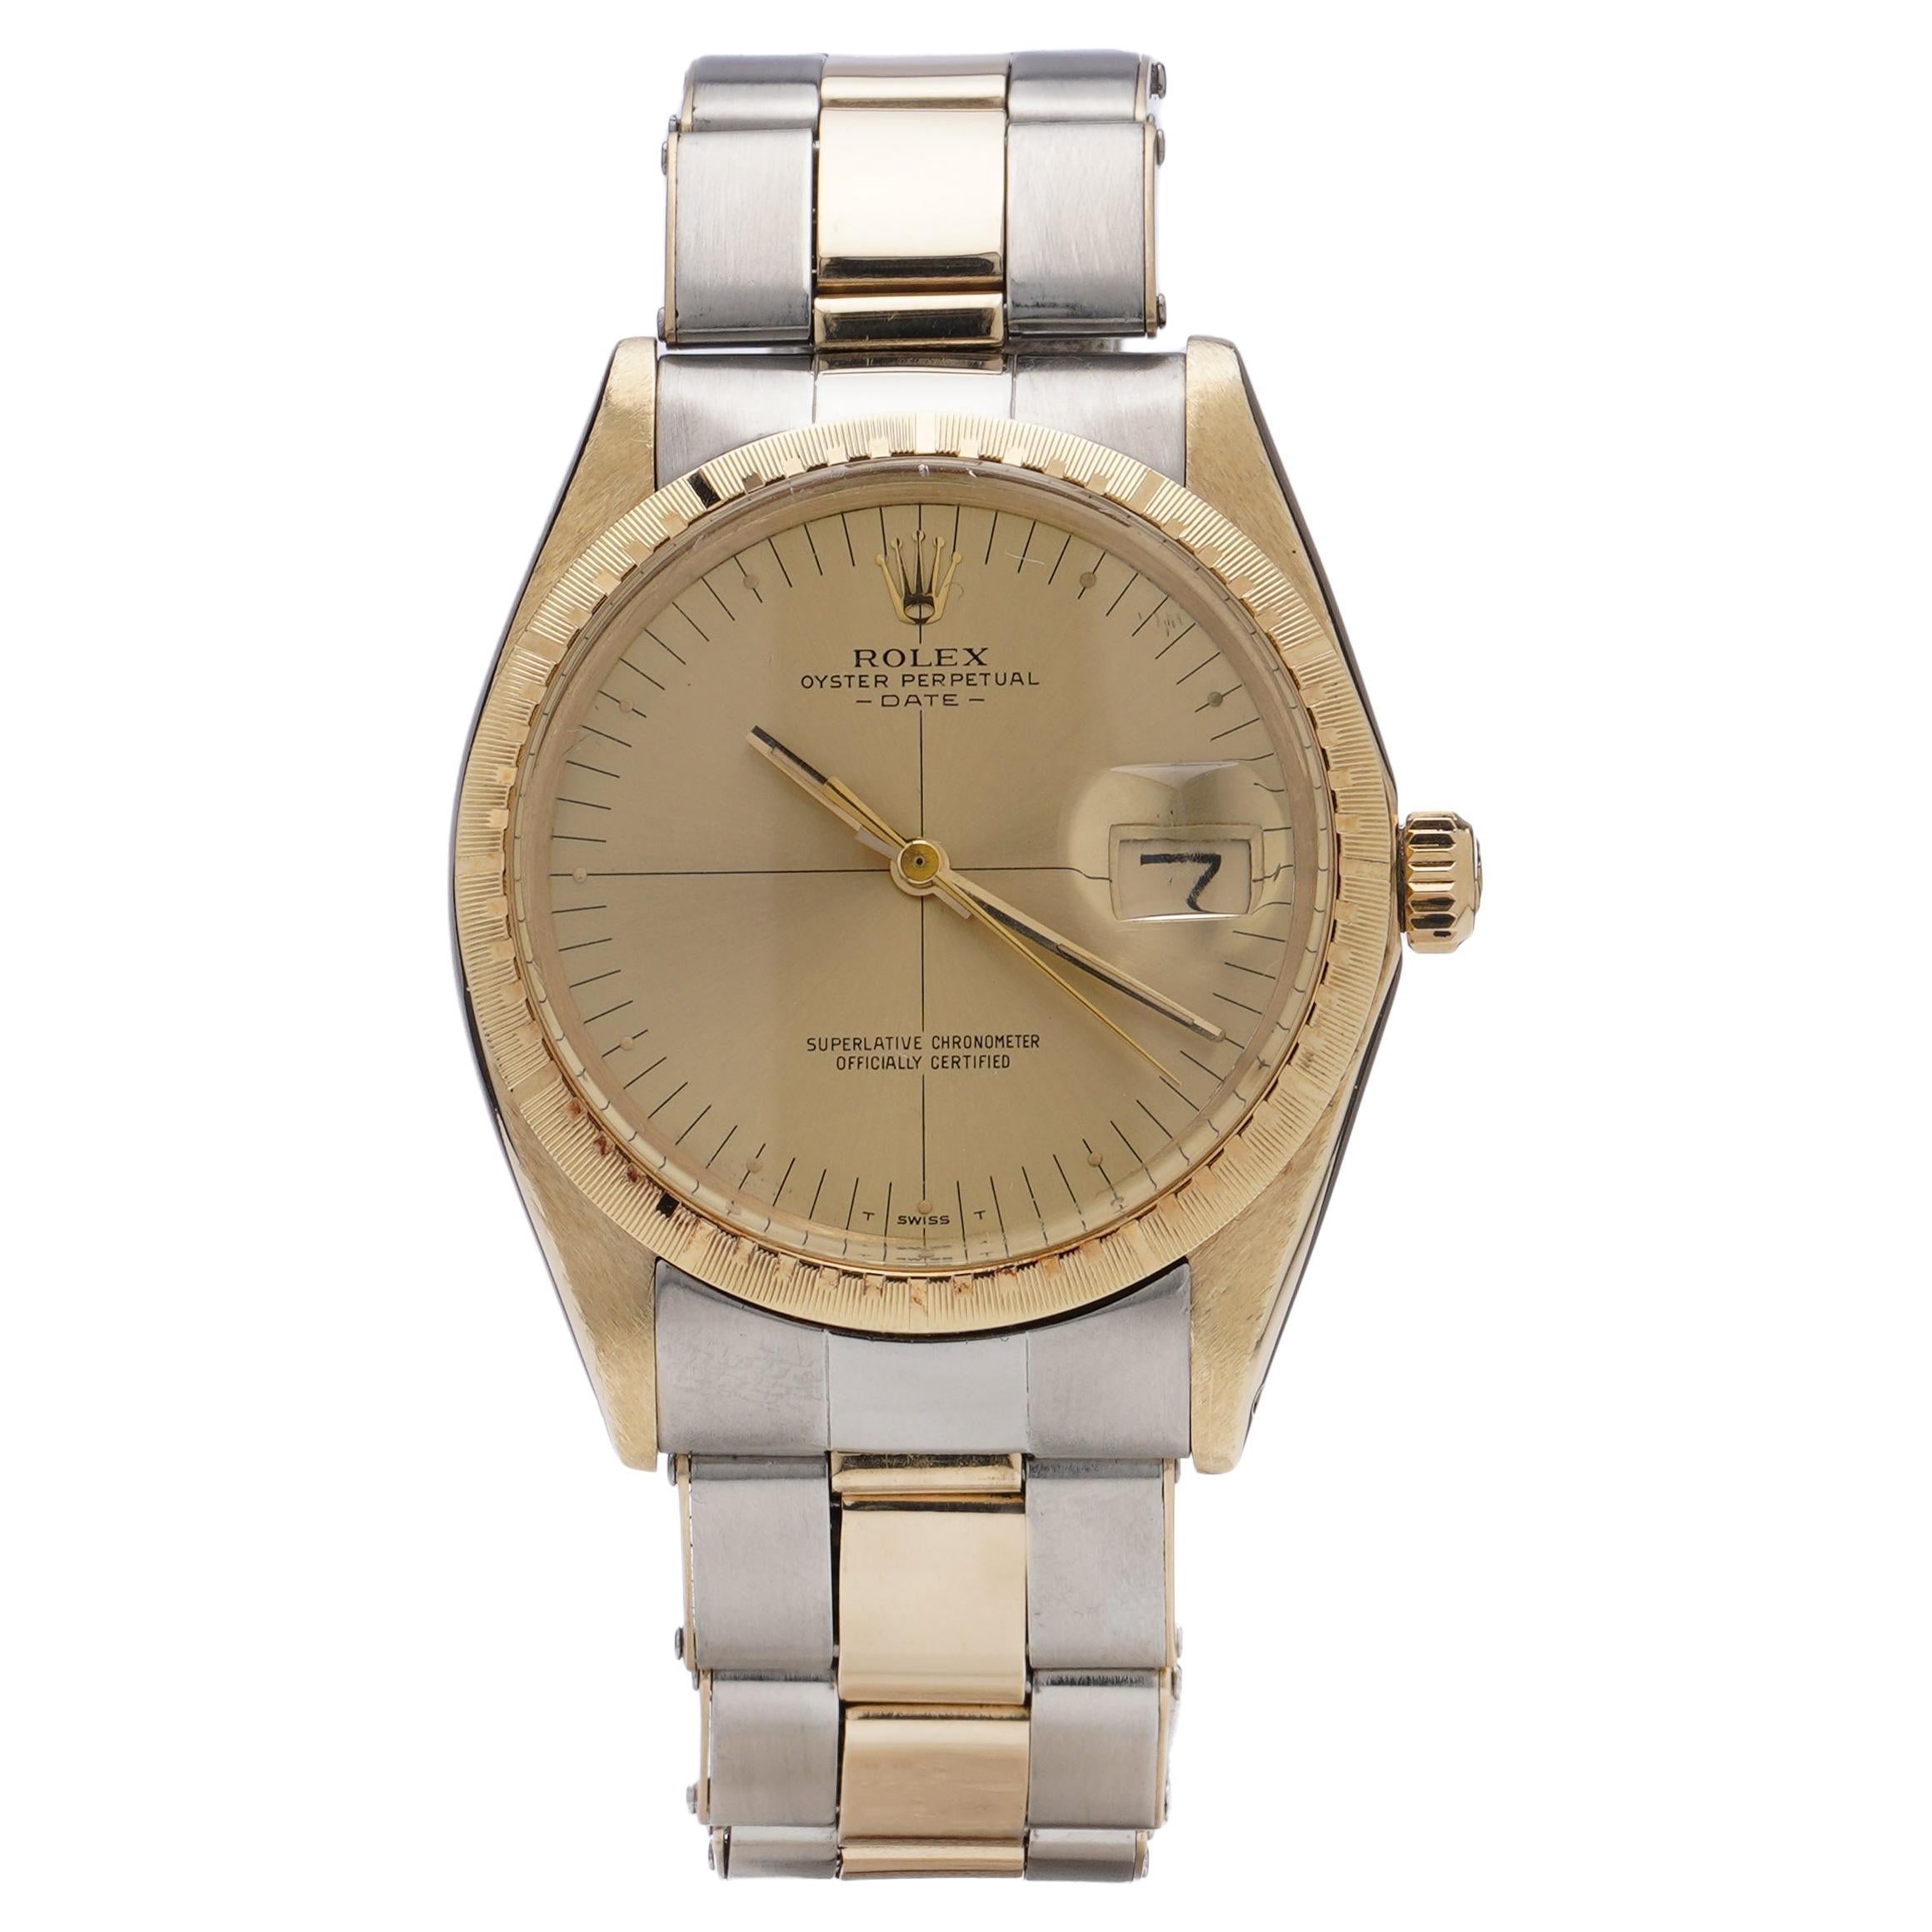 Rolex 14 Karat Yellow Gold and Steel Oyster Perpetual Date 1512 For Sale